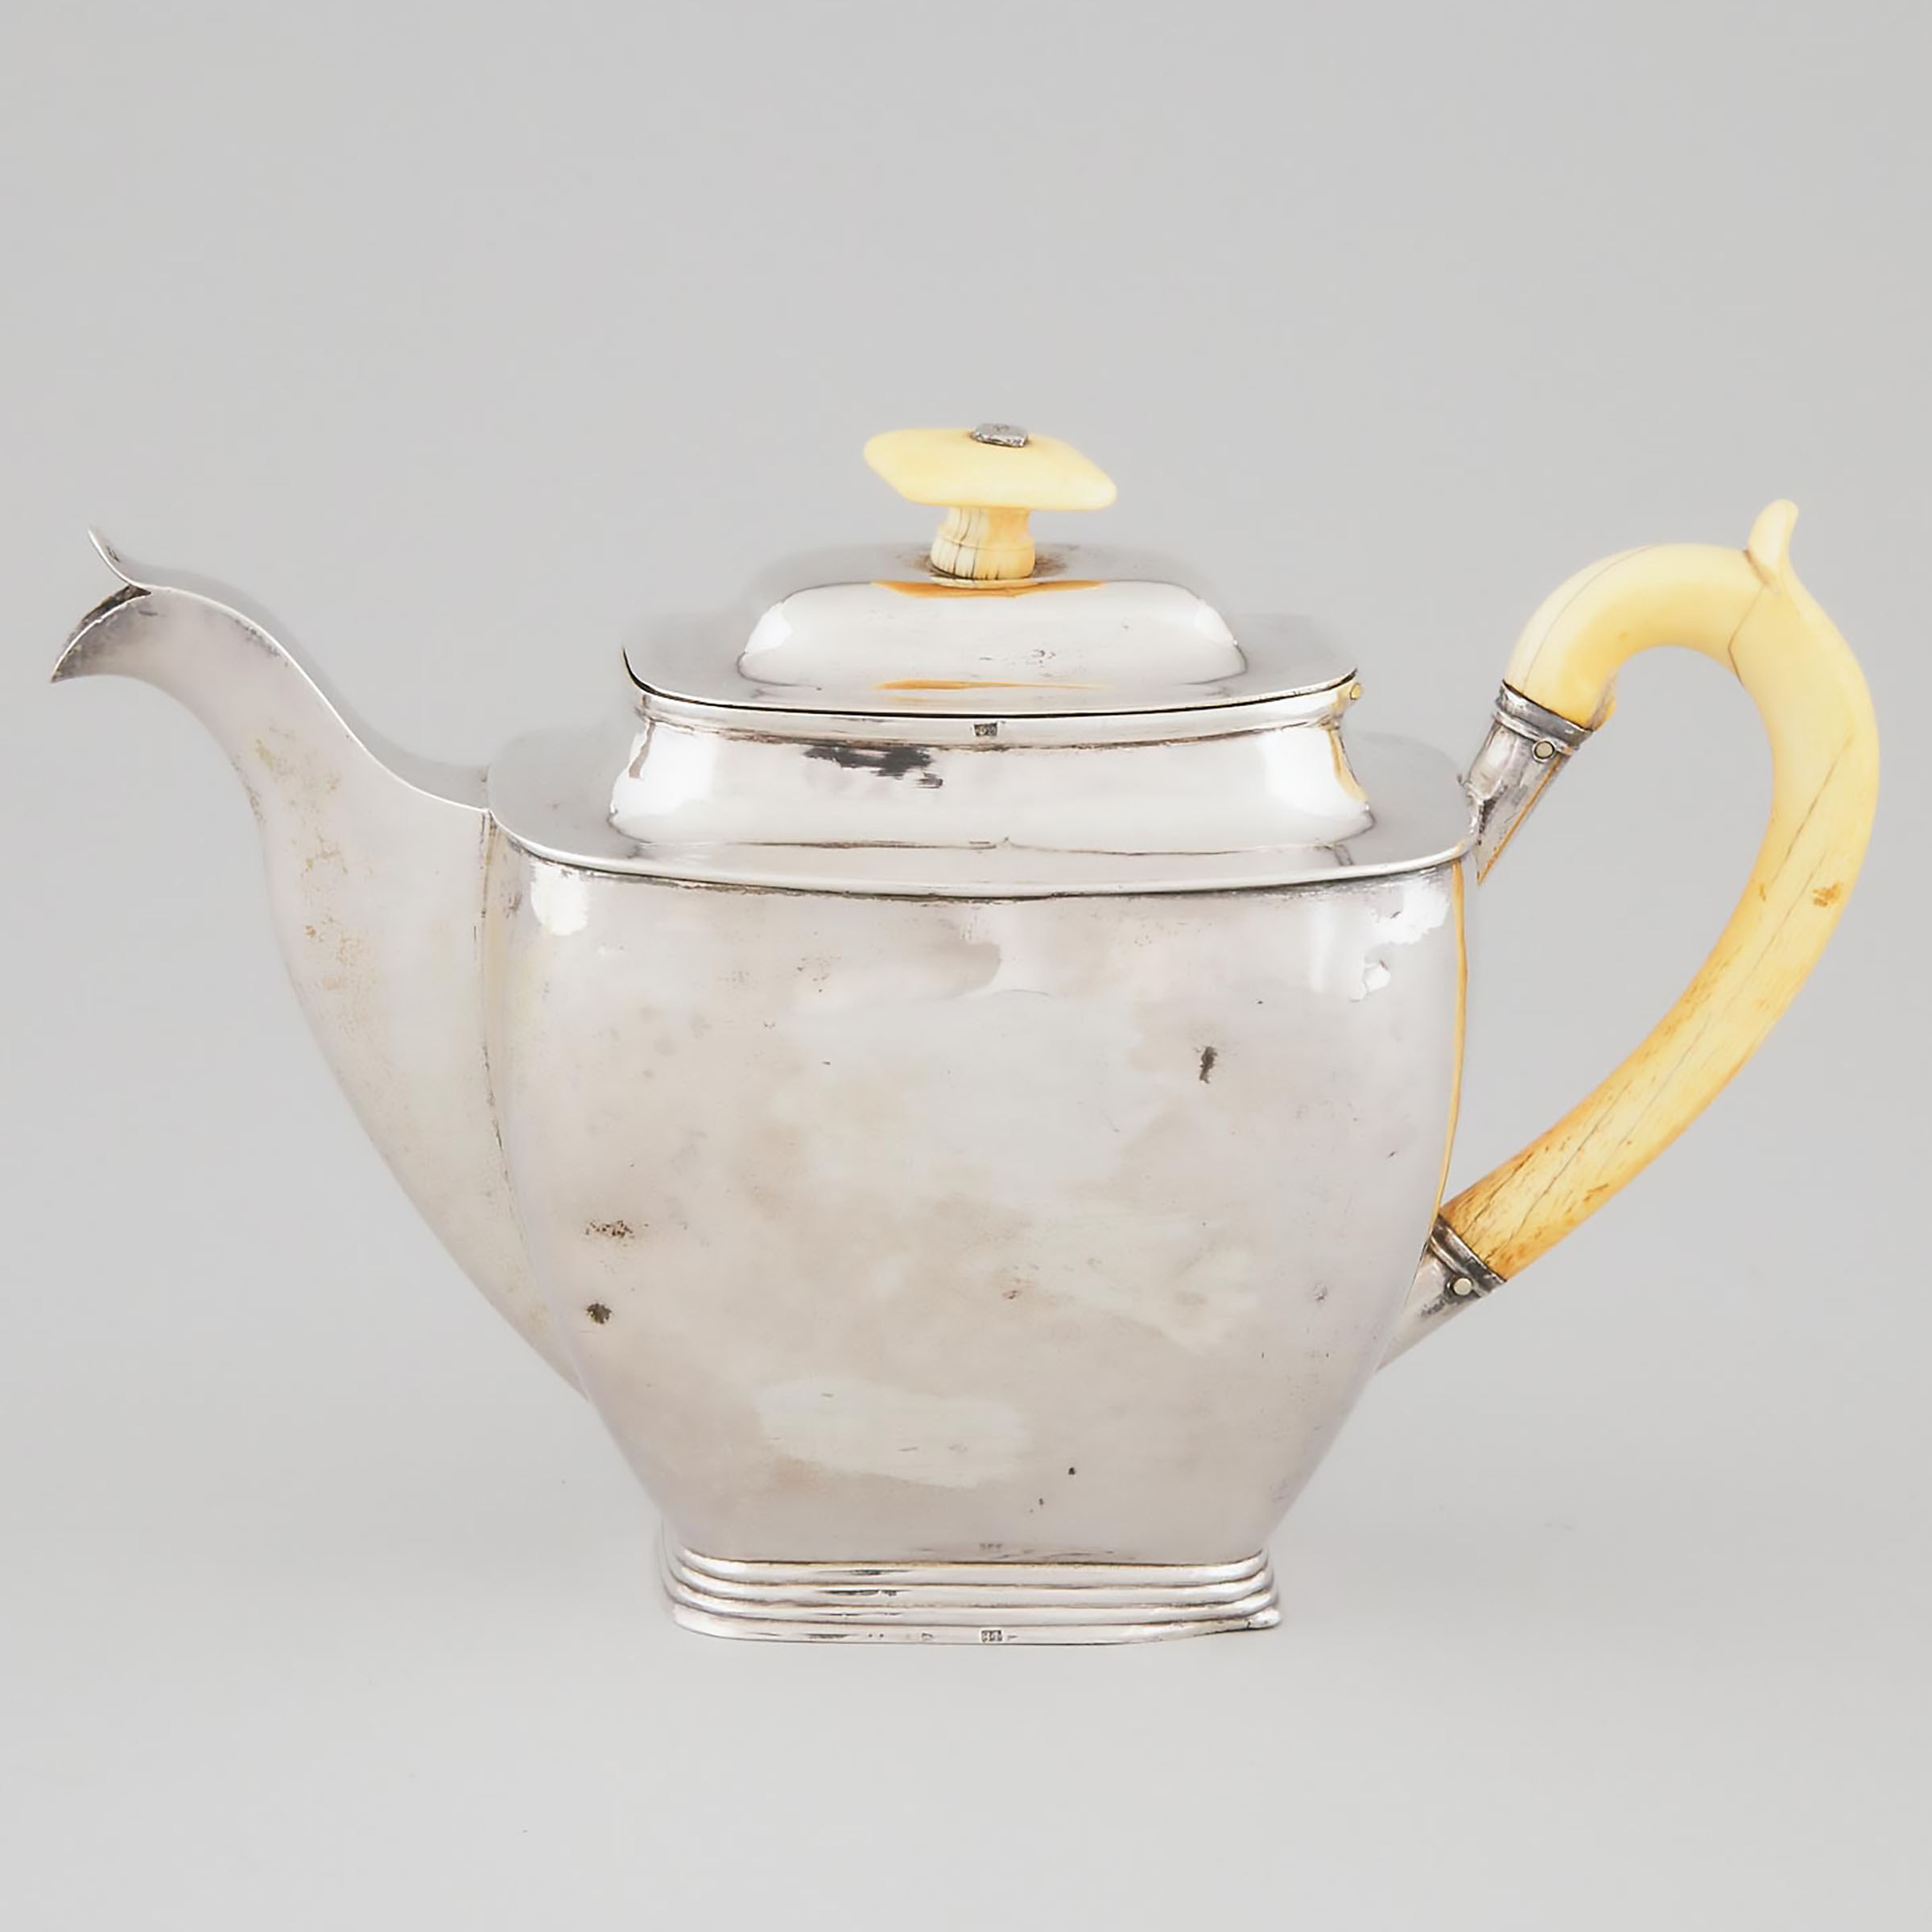 Russian Silver Teapot, Martin Lavrov, Moscow, 1830